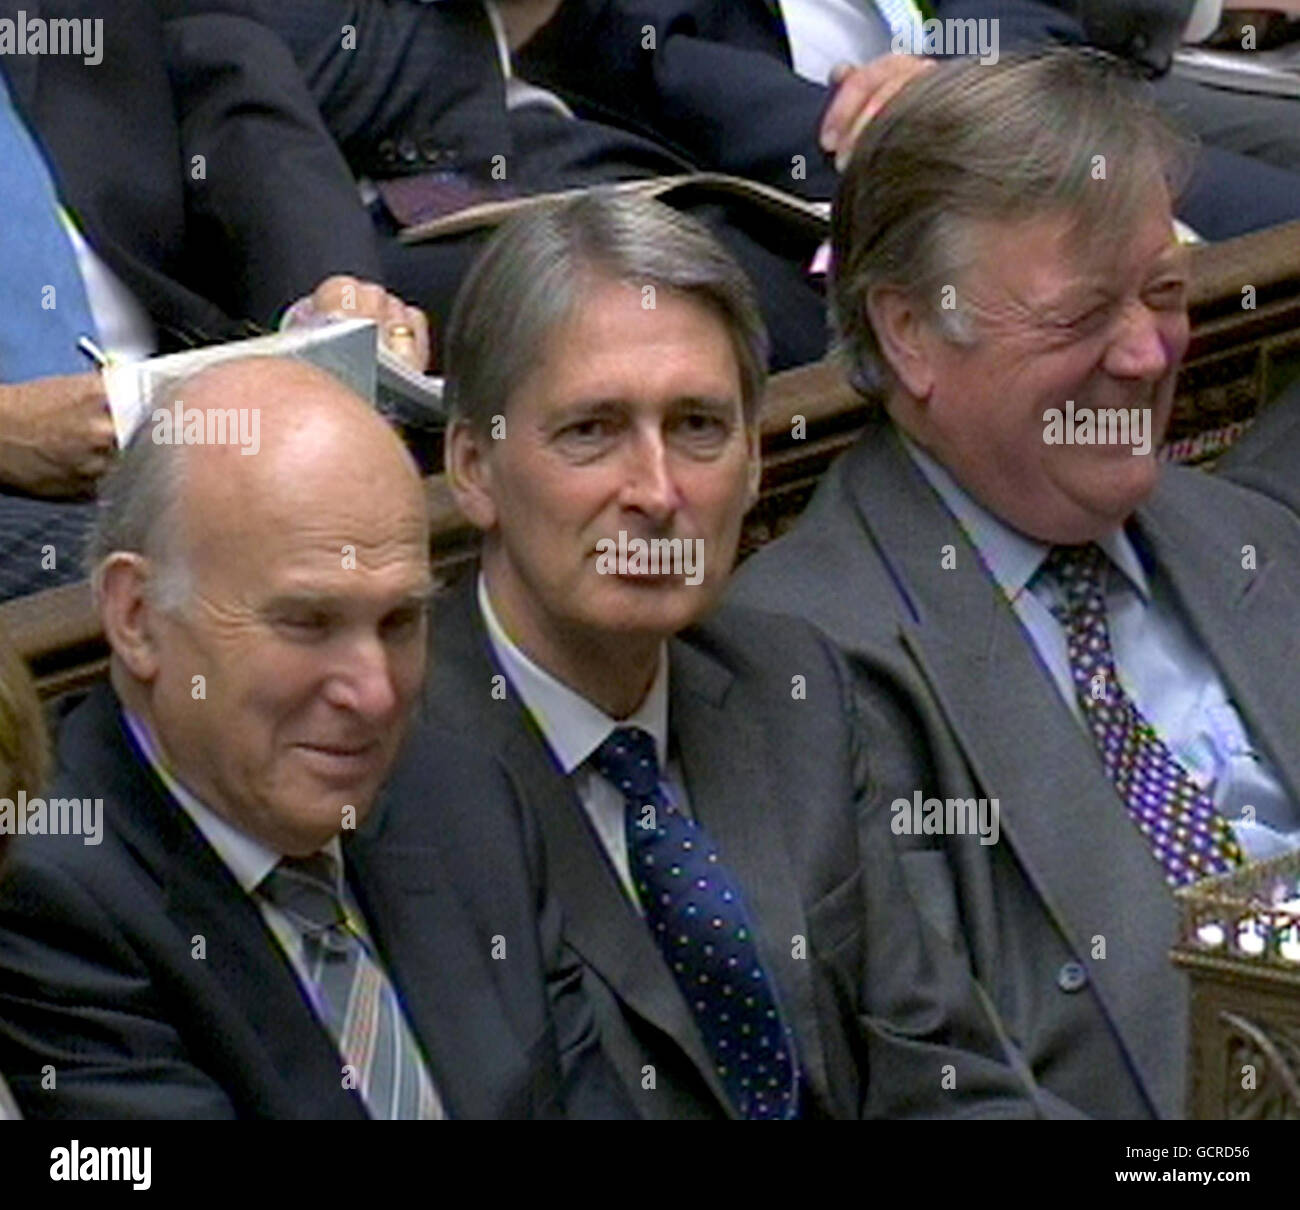 (From left to right) Business Secretary Vince Cable, Transport Secretary Philip Hammond and Justice Secretary Kenneth Clarke during Prime Minister's Questions in the House of Commons, London. Stock Photo